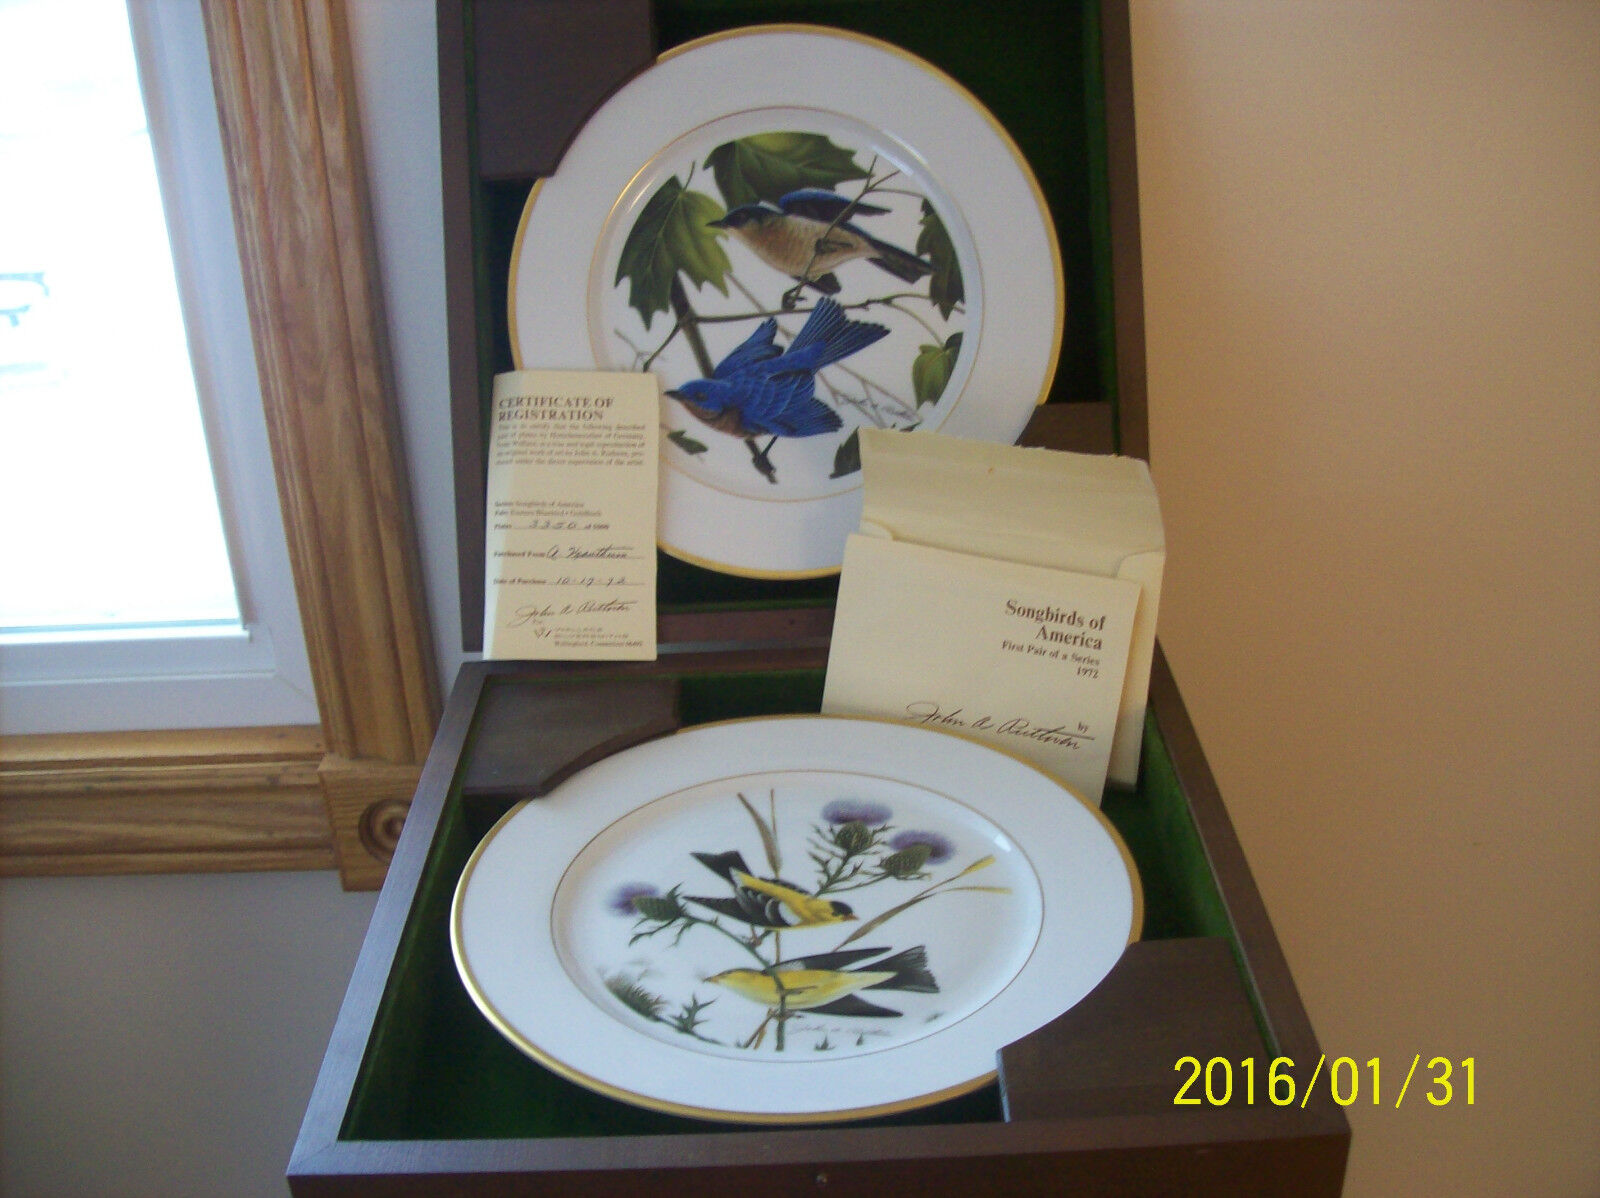 Songbirds of America First Pair 1972 John A Ruthaven Wallace Silversmith Plates